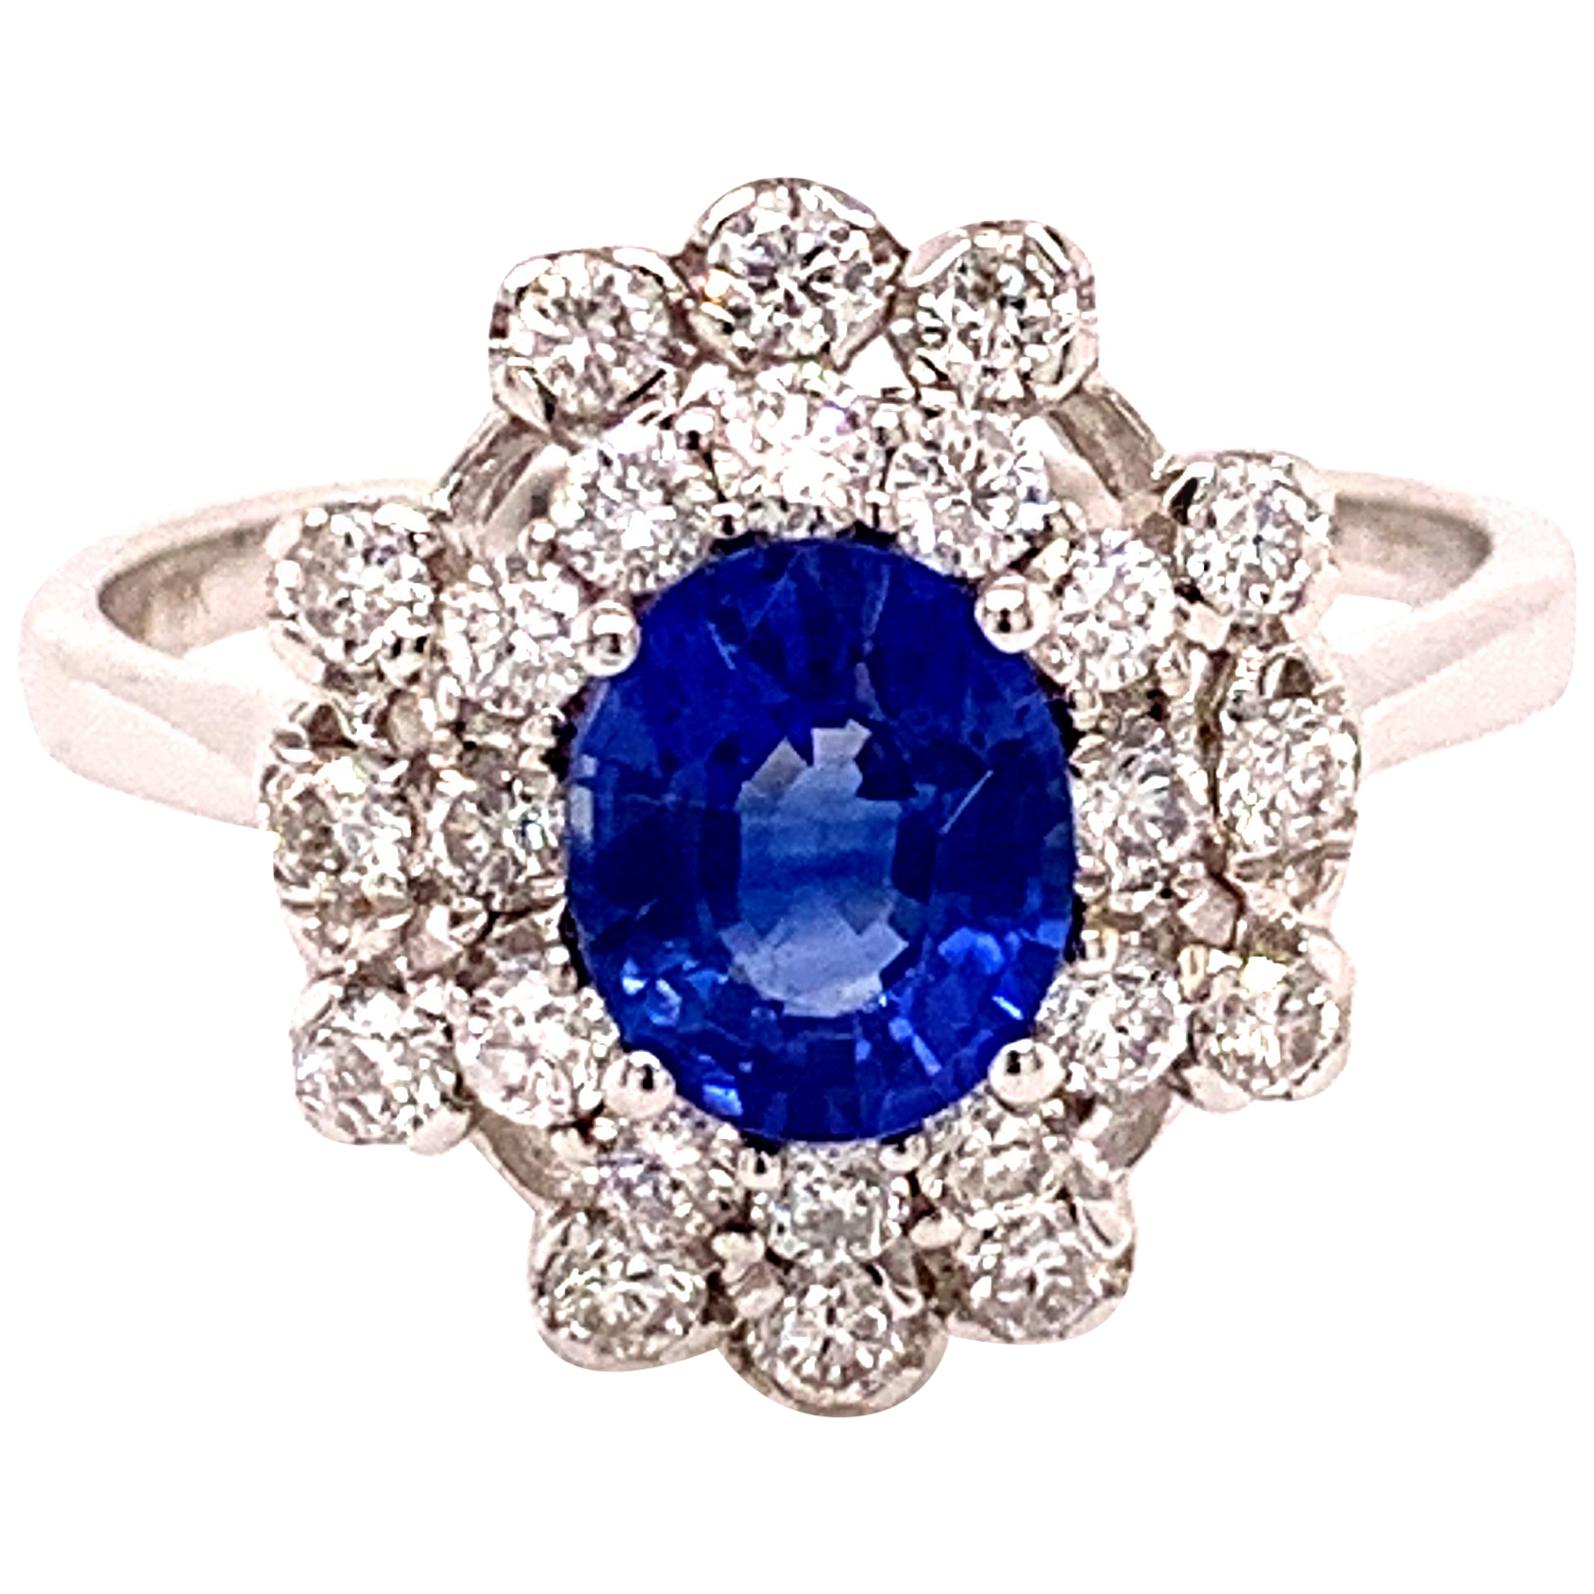 Sapphire 1.14 Carat White Gold Cocktail Ring